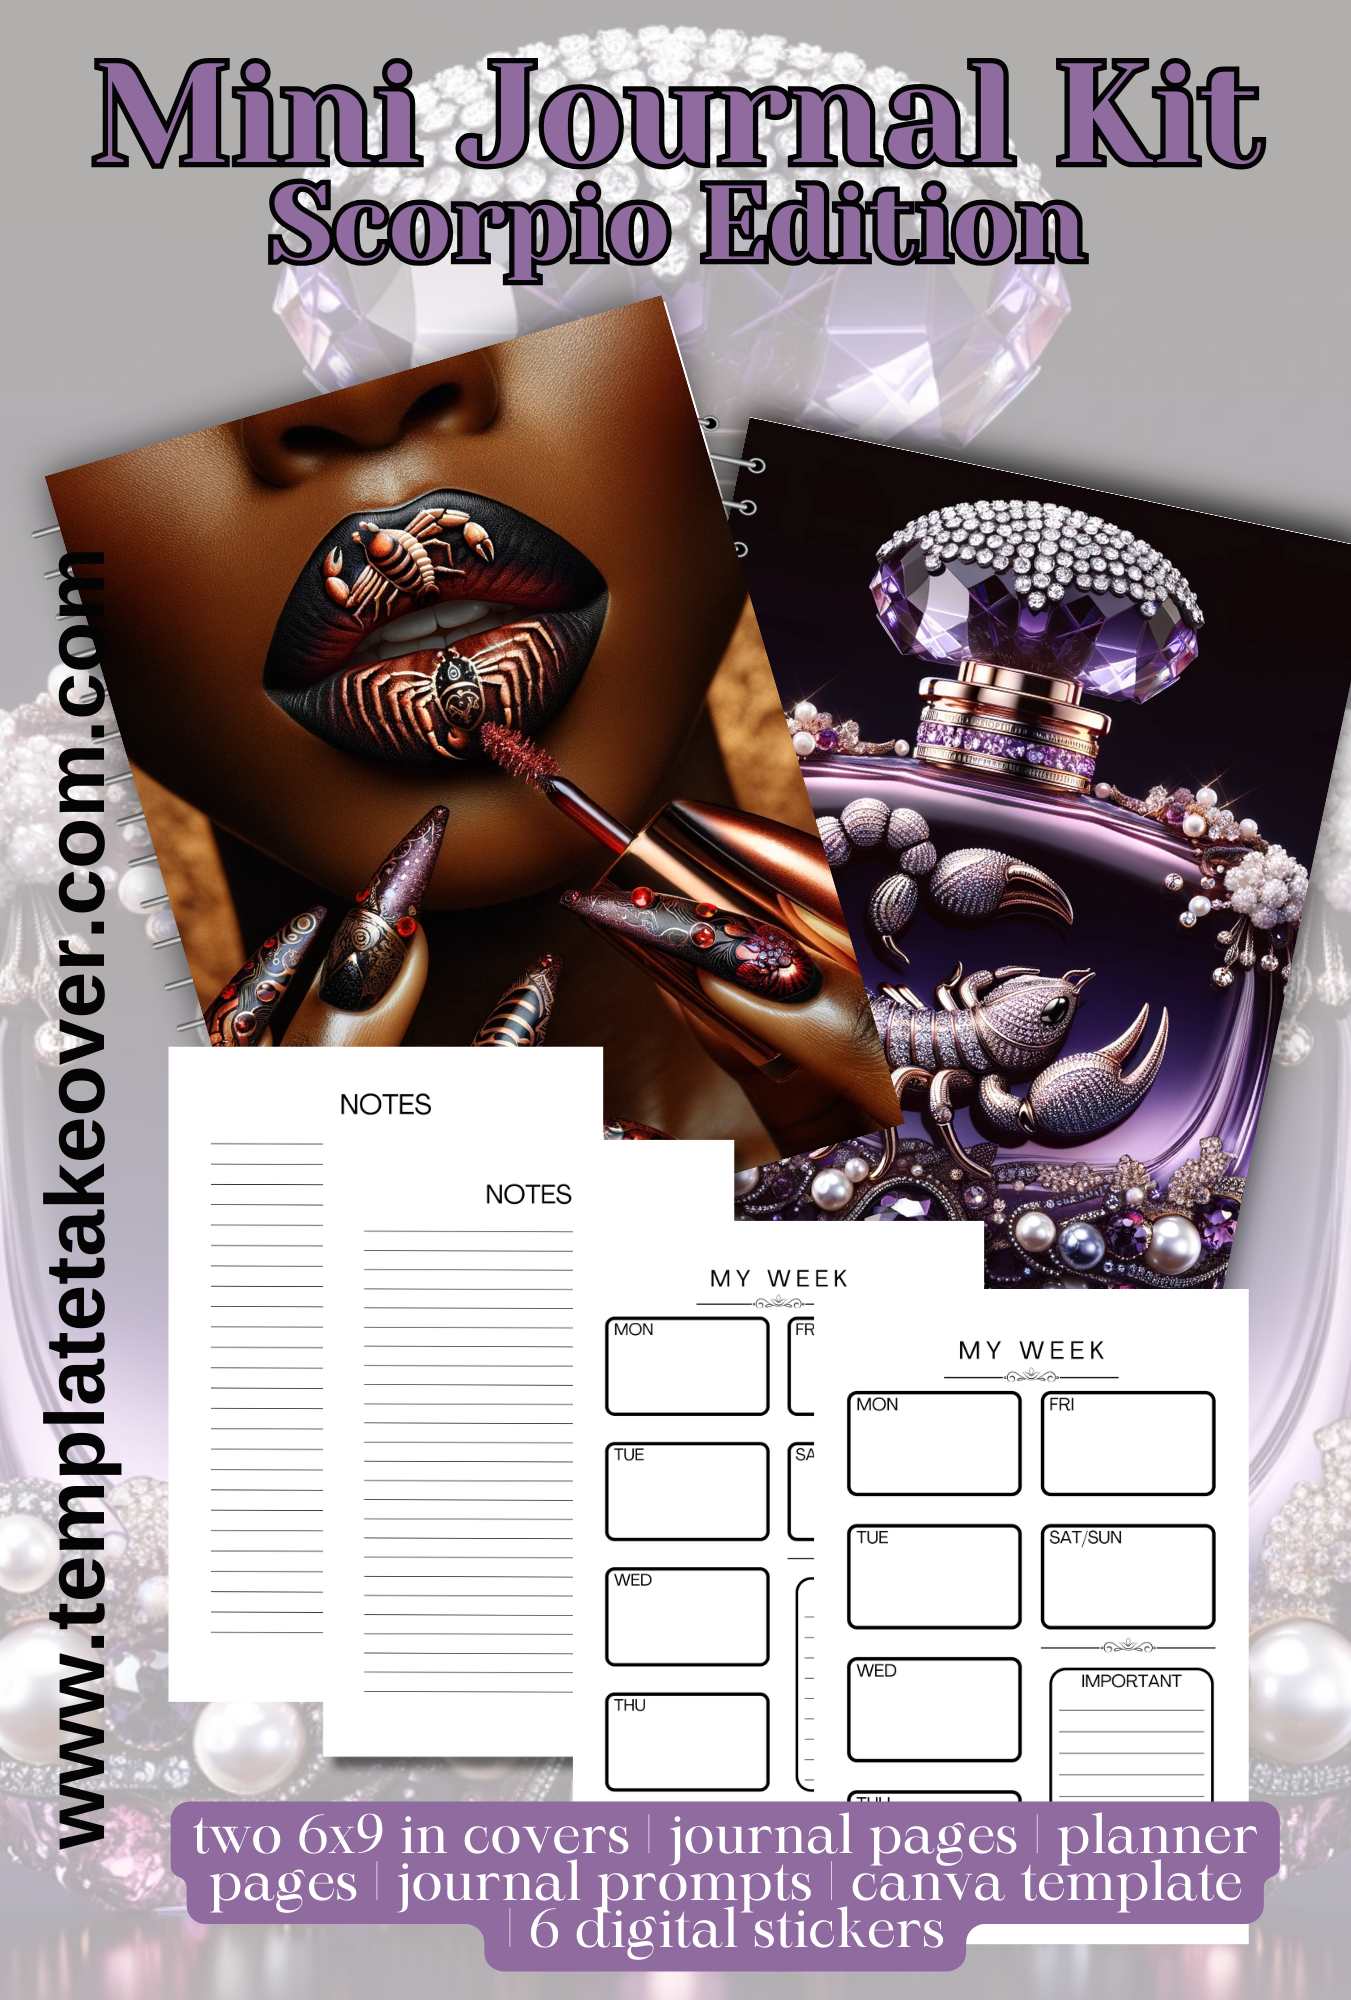 Celestial Scents: Scorpio Edition Journal: Perfect for Crafters, Creatives, Coaches, and More - Set of 2 Covers, 15 Journal Pages, 5 Planner Pages, 15 Prompts and 6 Digital Stickers. Volume 3